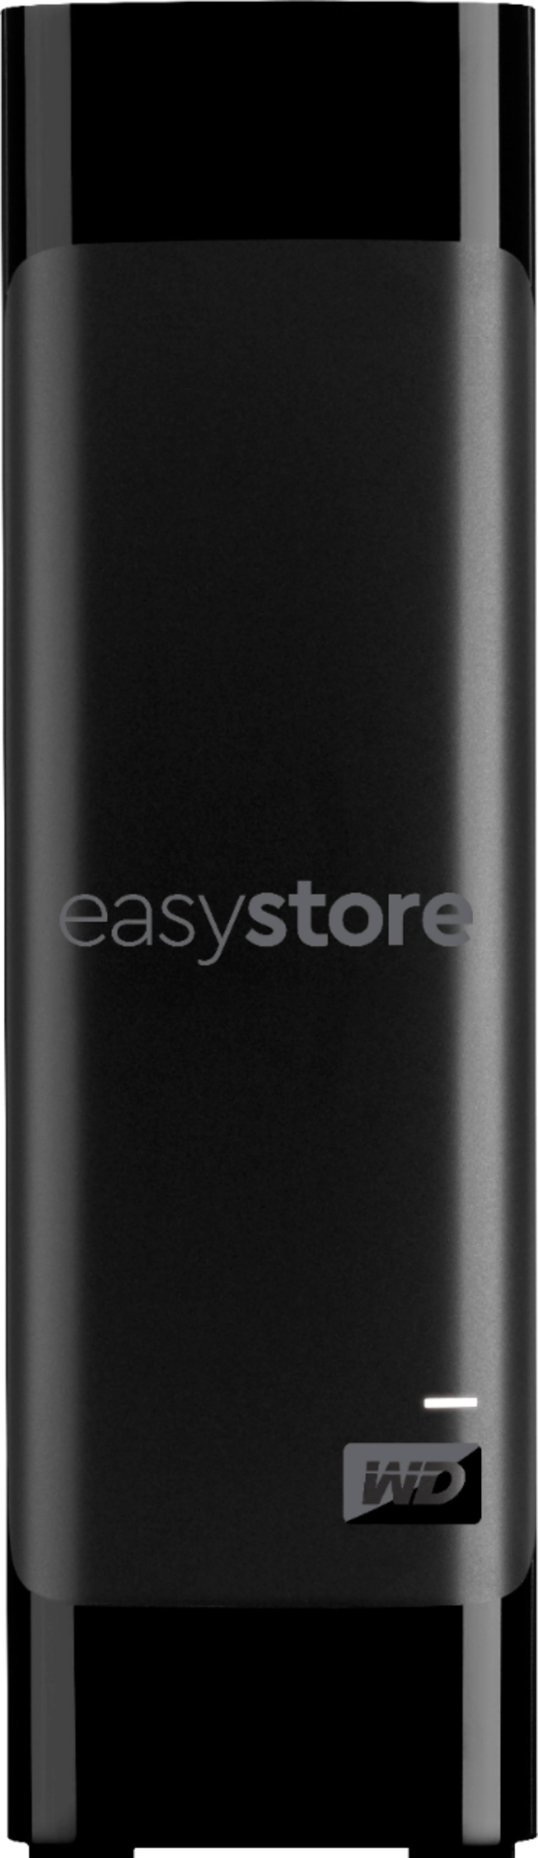 14TB WD easystore External USB 3.0 Hard Drive $200 + Free Shipping $199.99